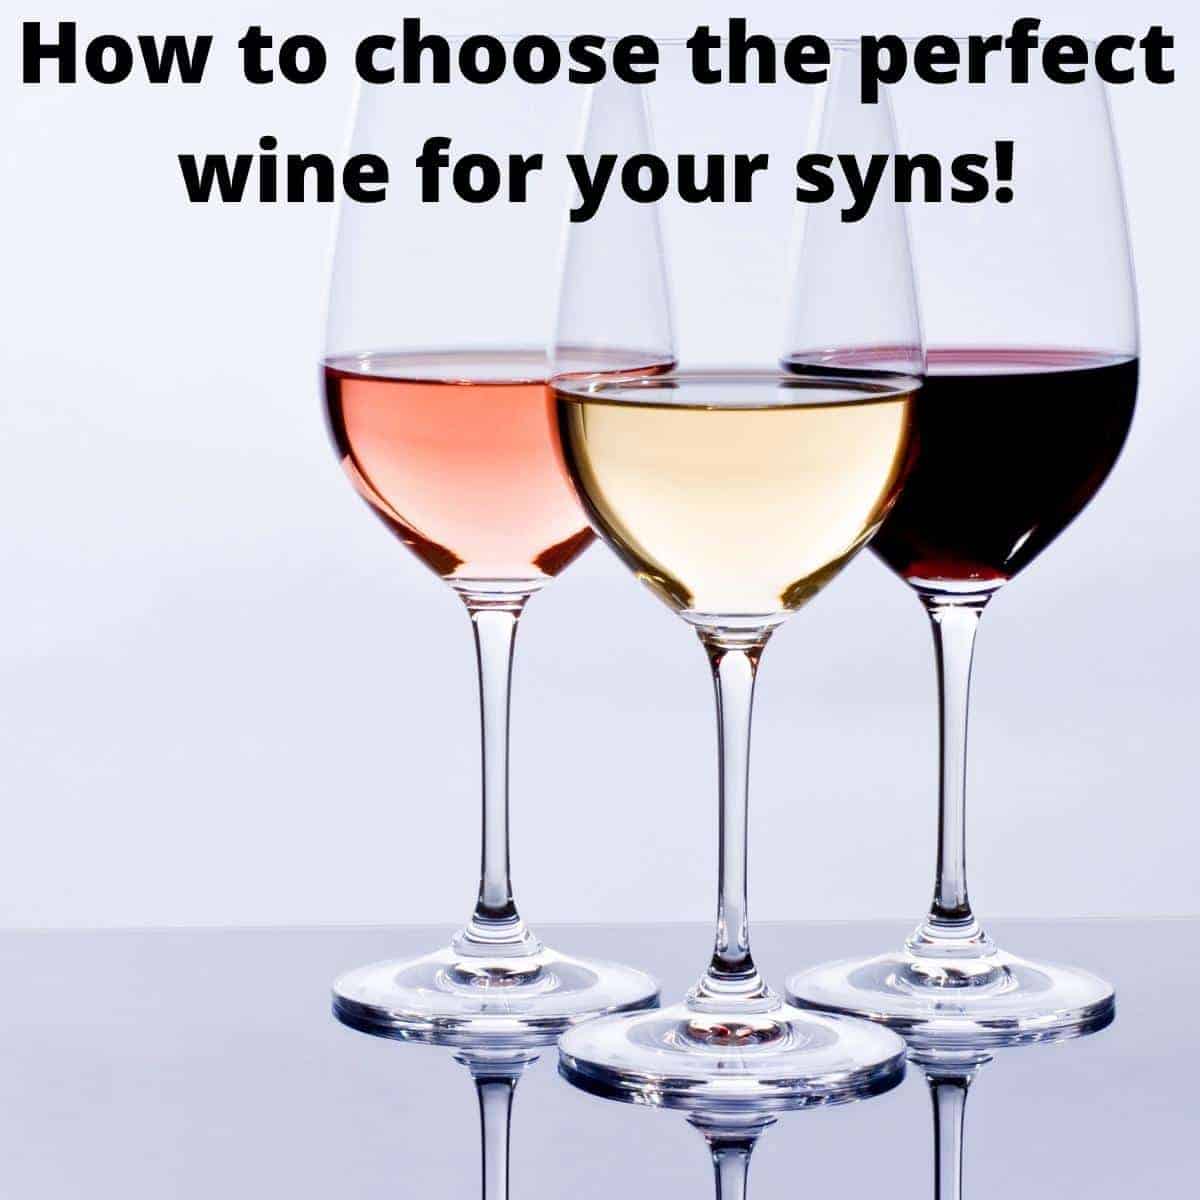 Unofficial Slimming World Low syn wine directory, choosing low syn Alcohol